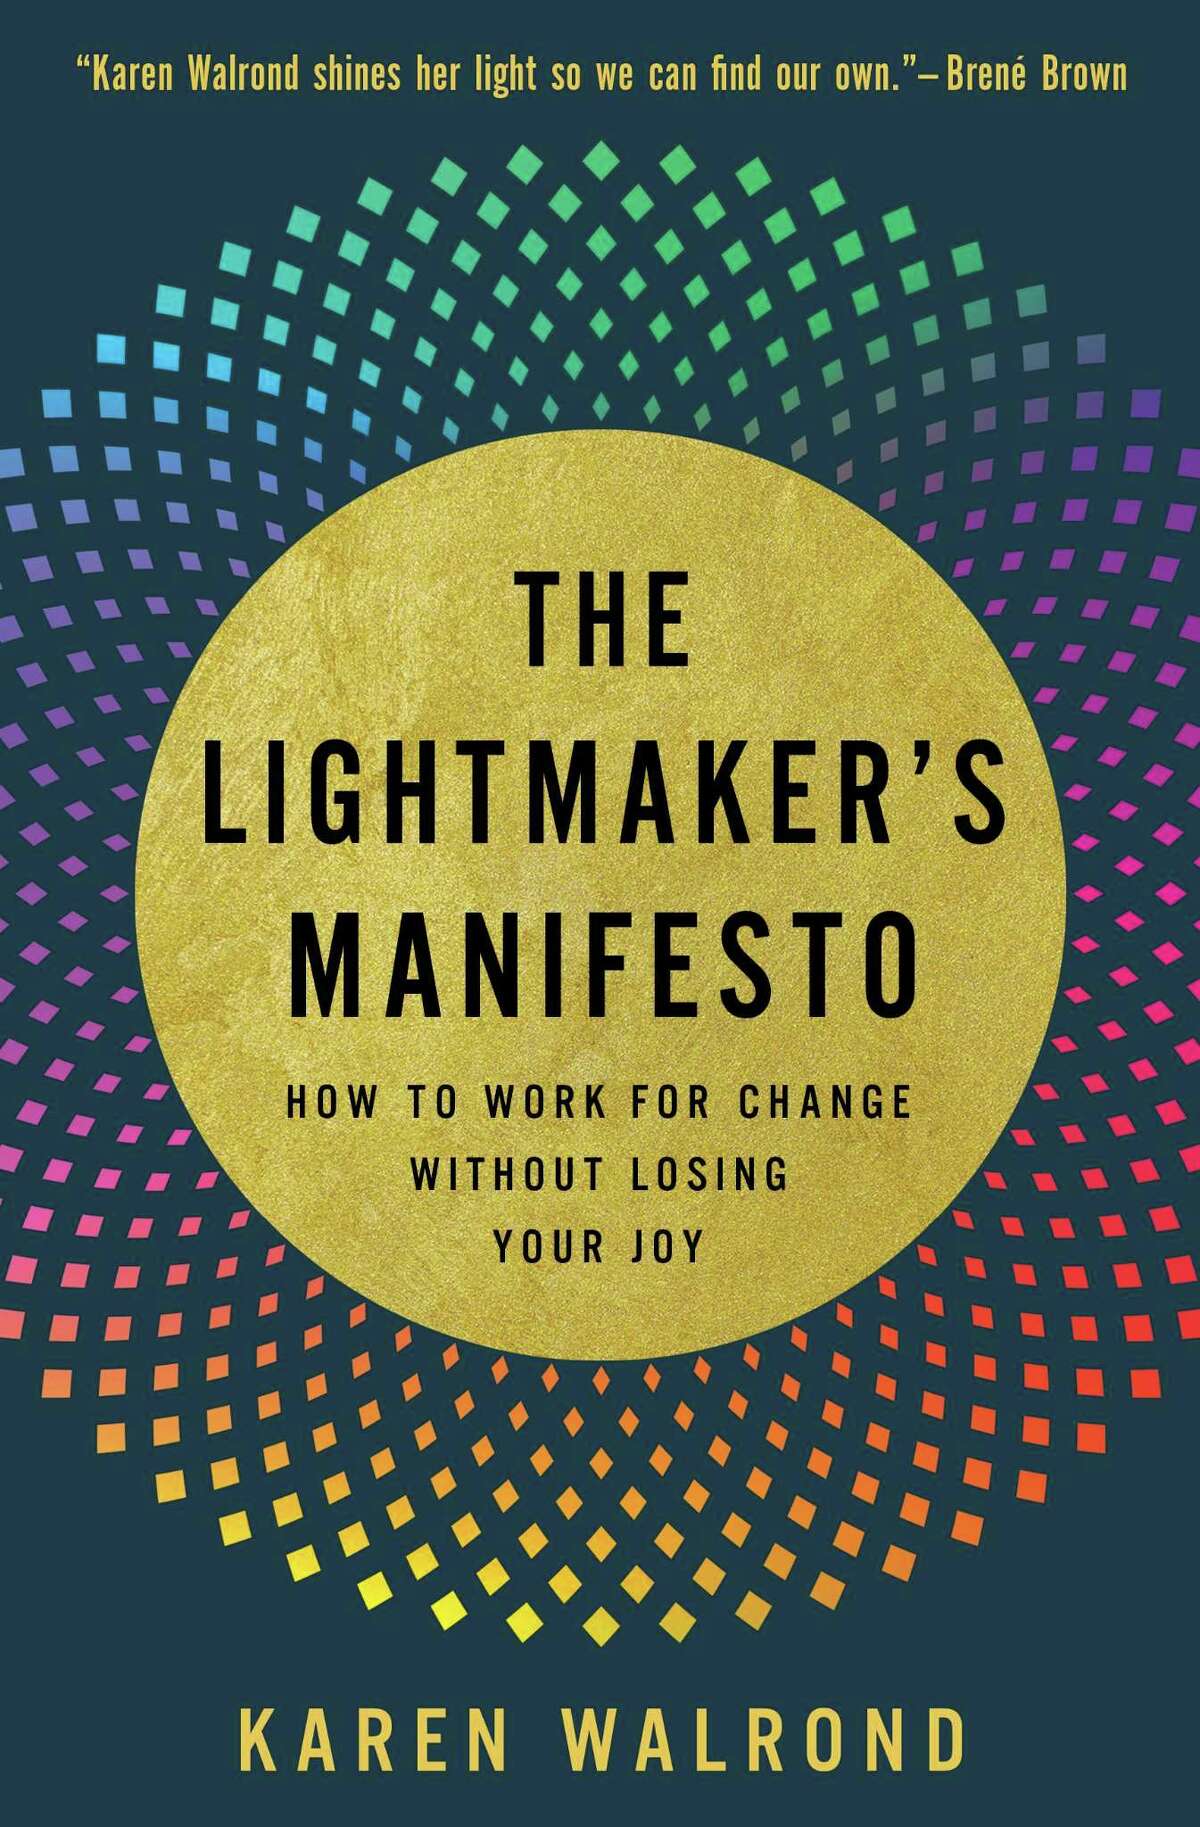 “The Lightmaker's Manifesto: How to Work for Change without Losing Your Joy”